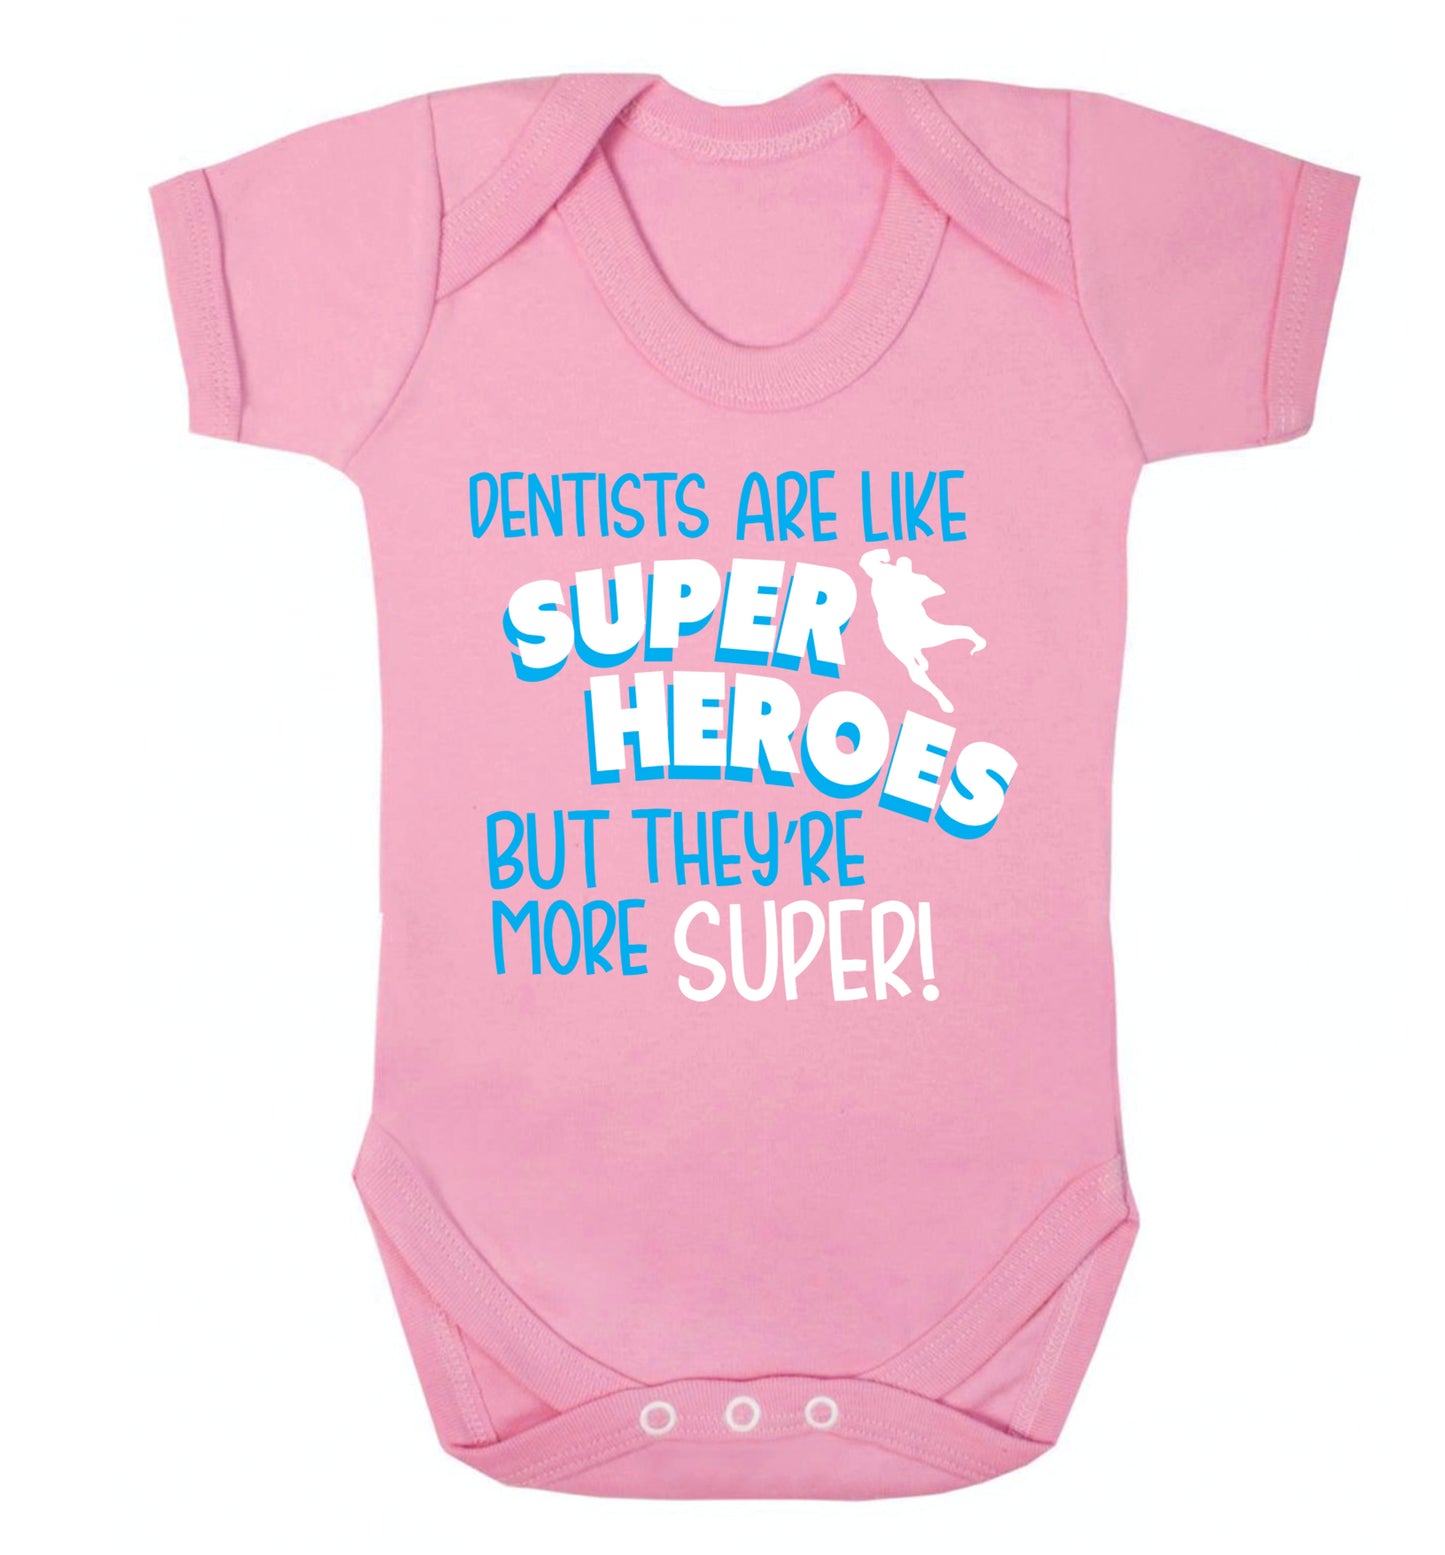 Dentists are like superheros but they're more super Baby Vest pale pink 18-24 months